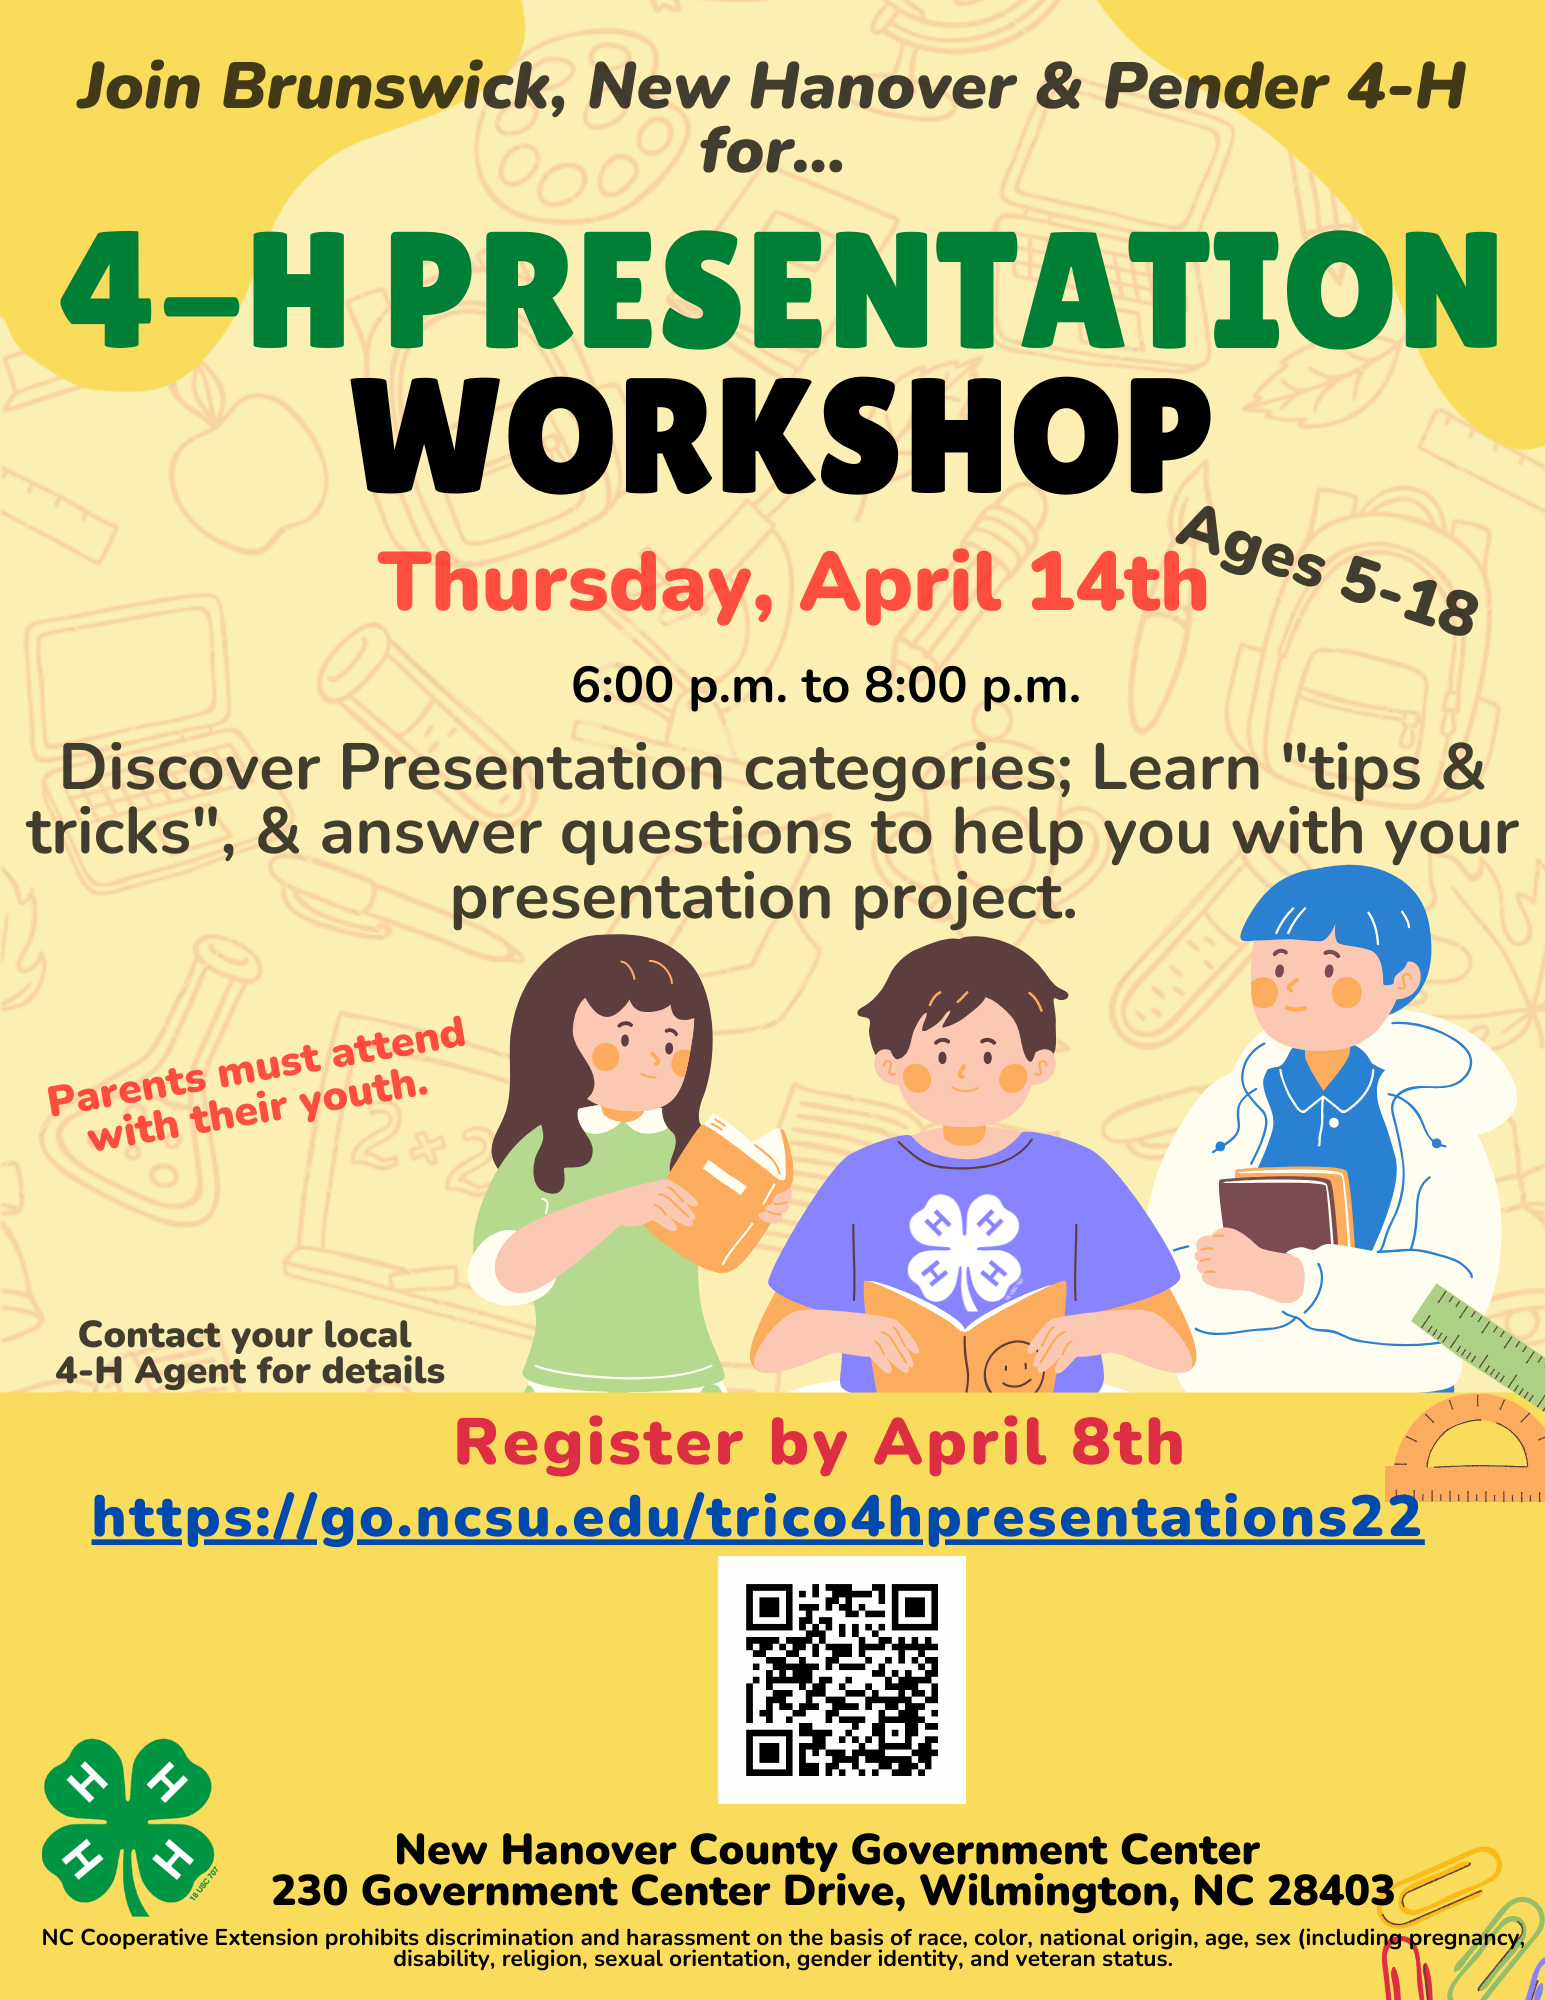 Presentation workshop details as included in article below, Parents must attend with their youth.